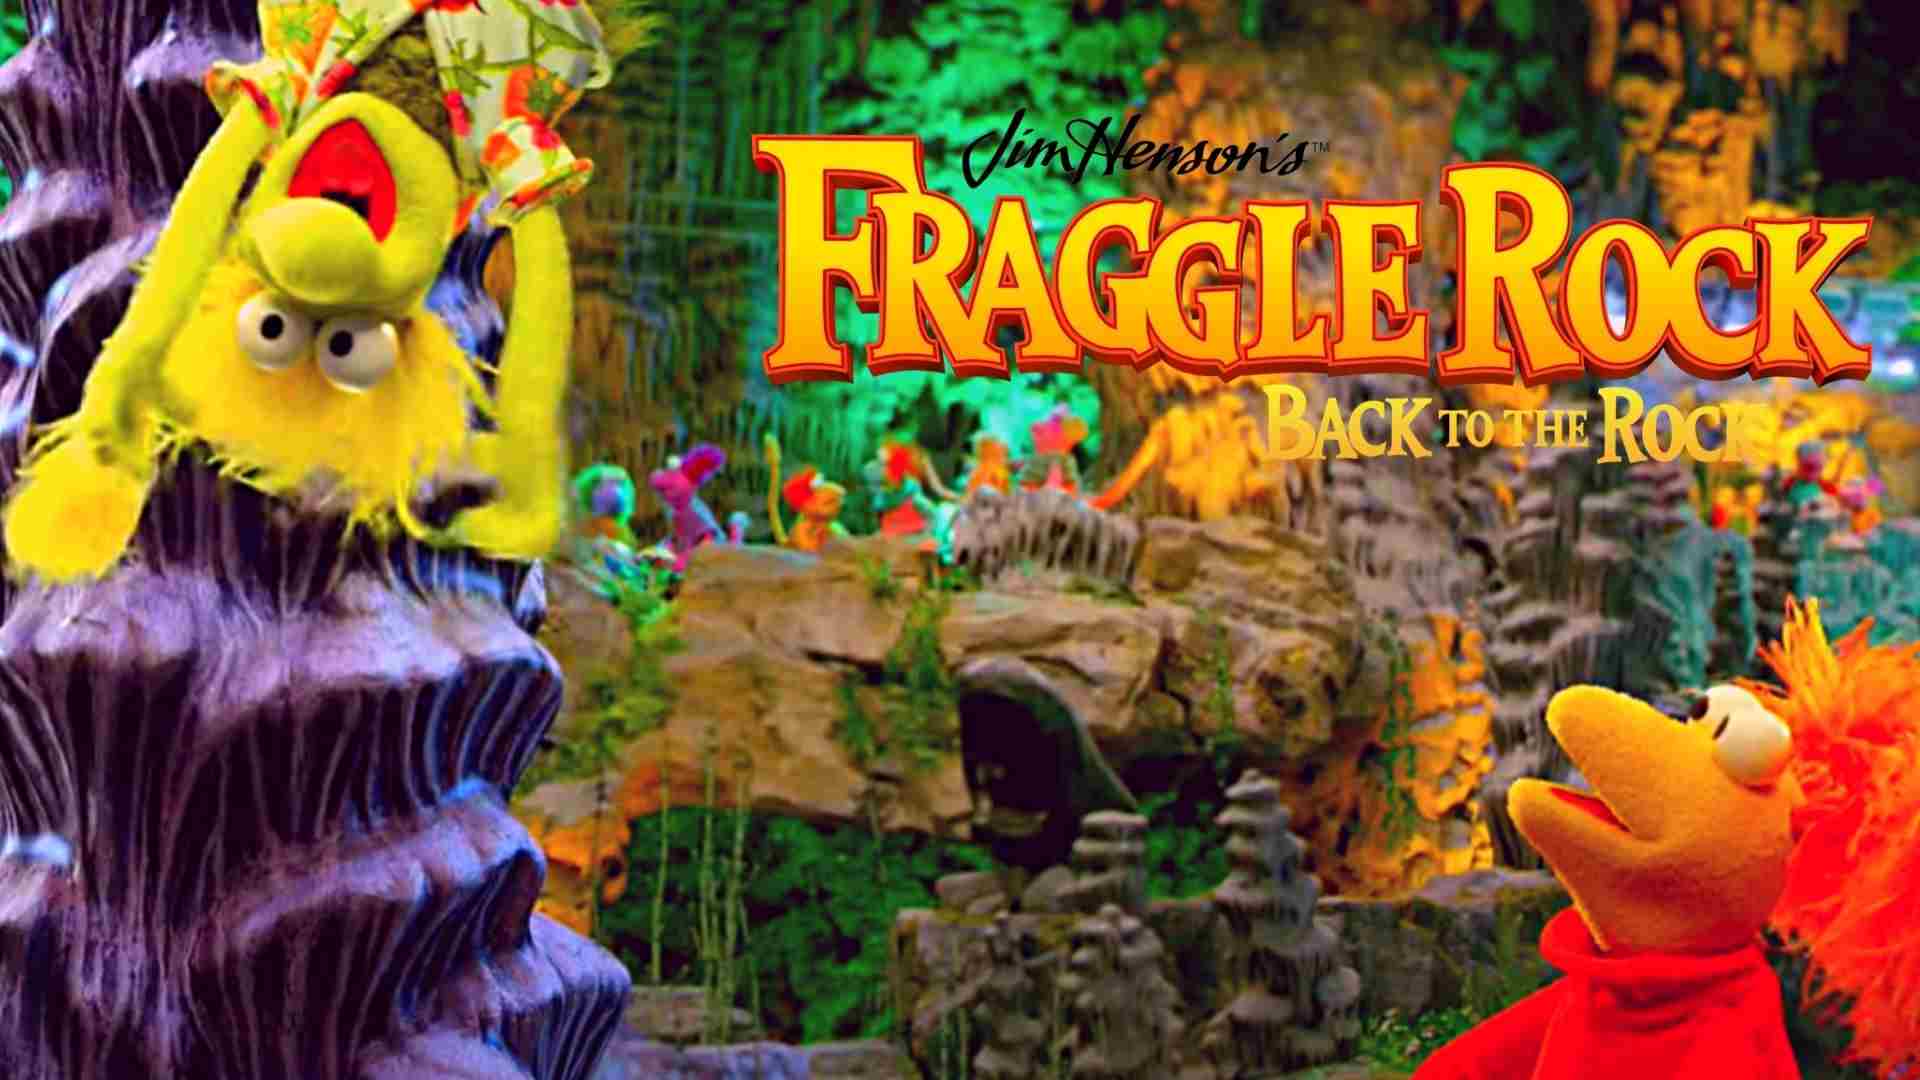  Fraggle Rock: Back to the Rock Parents Guide and Age Rating | 2022